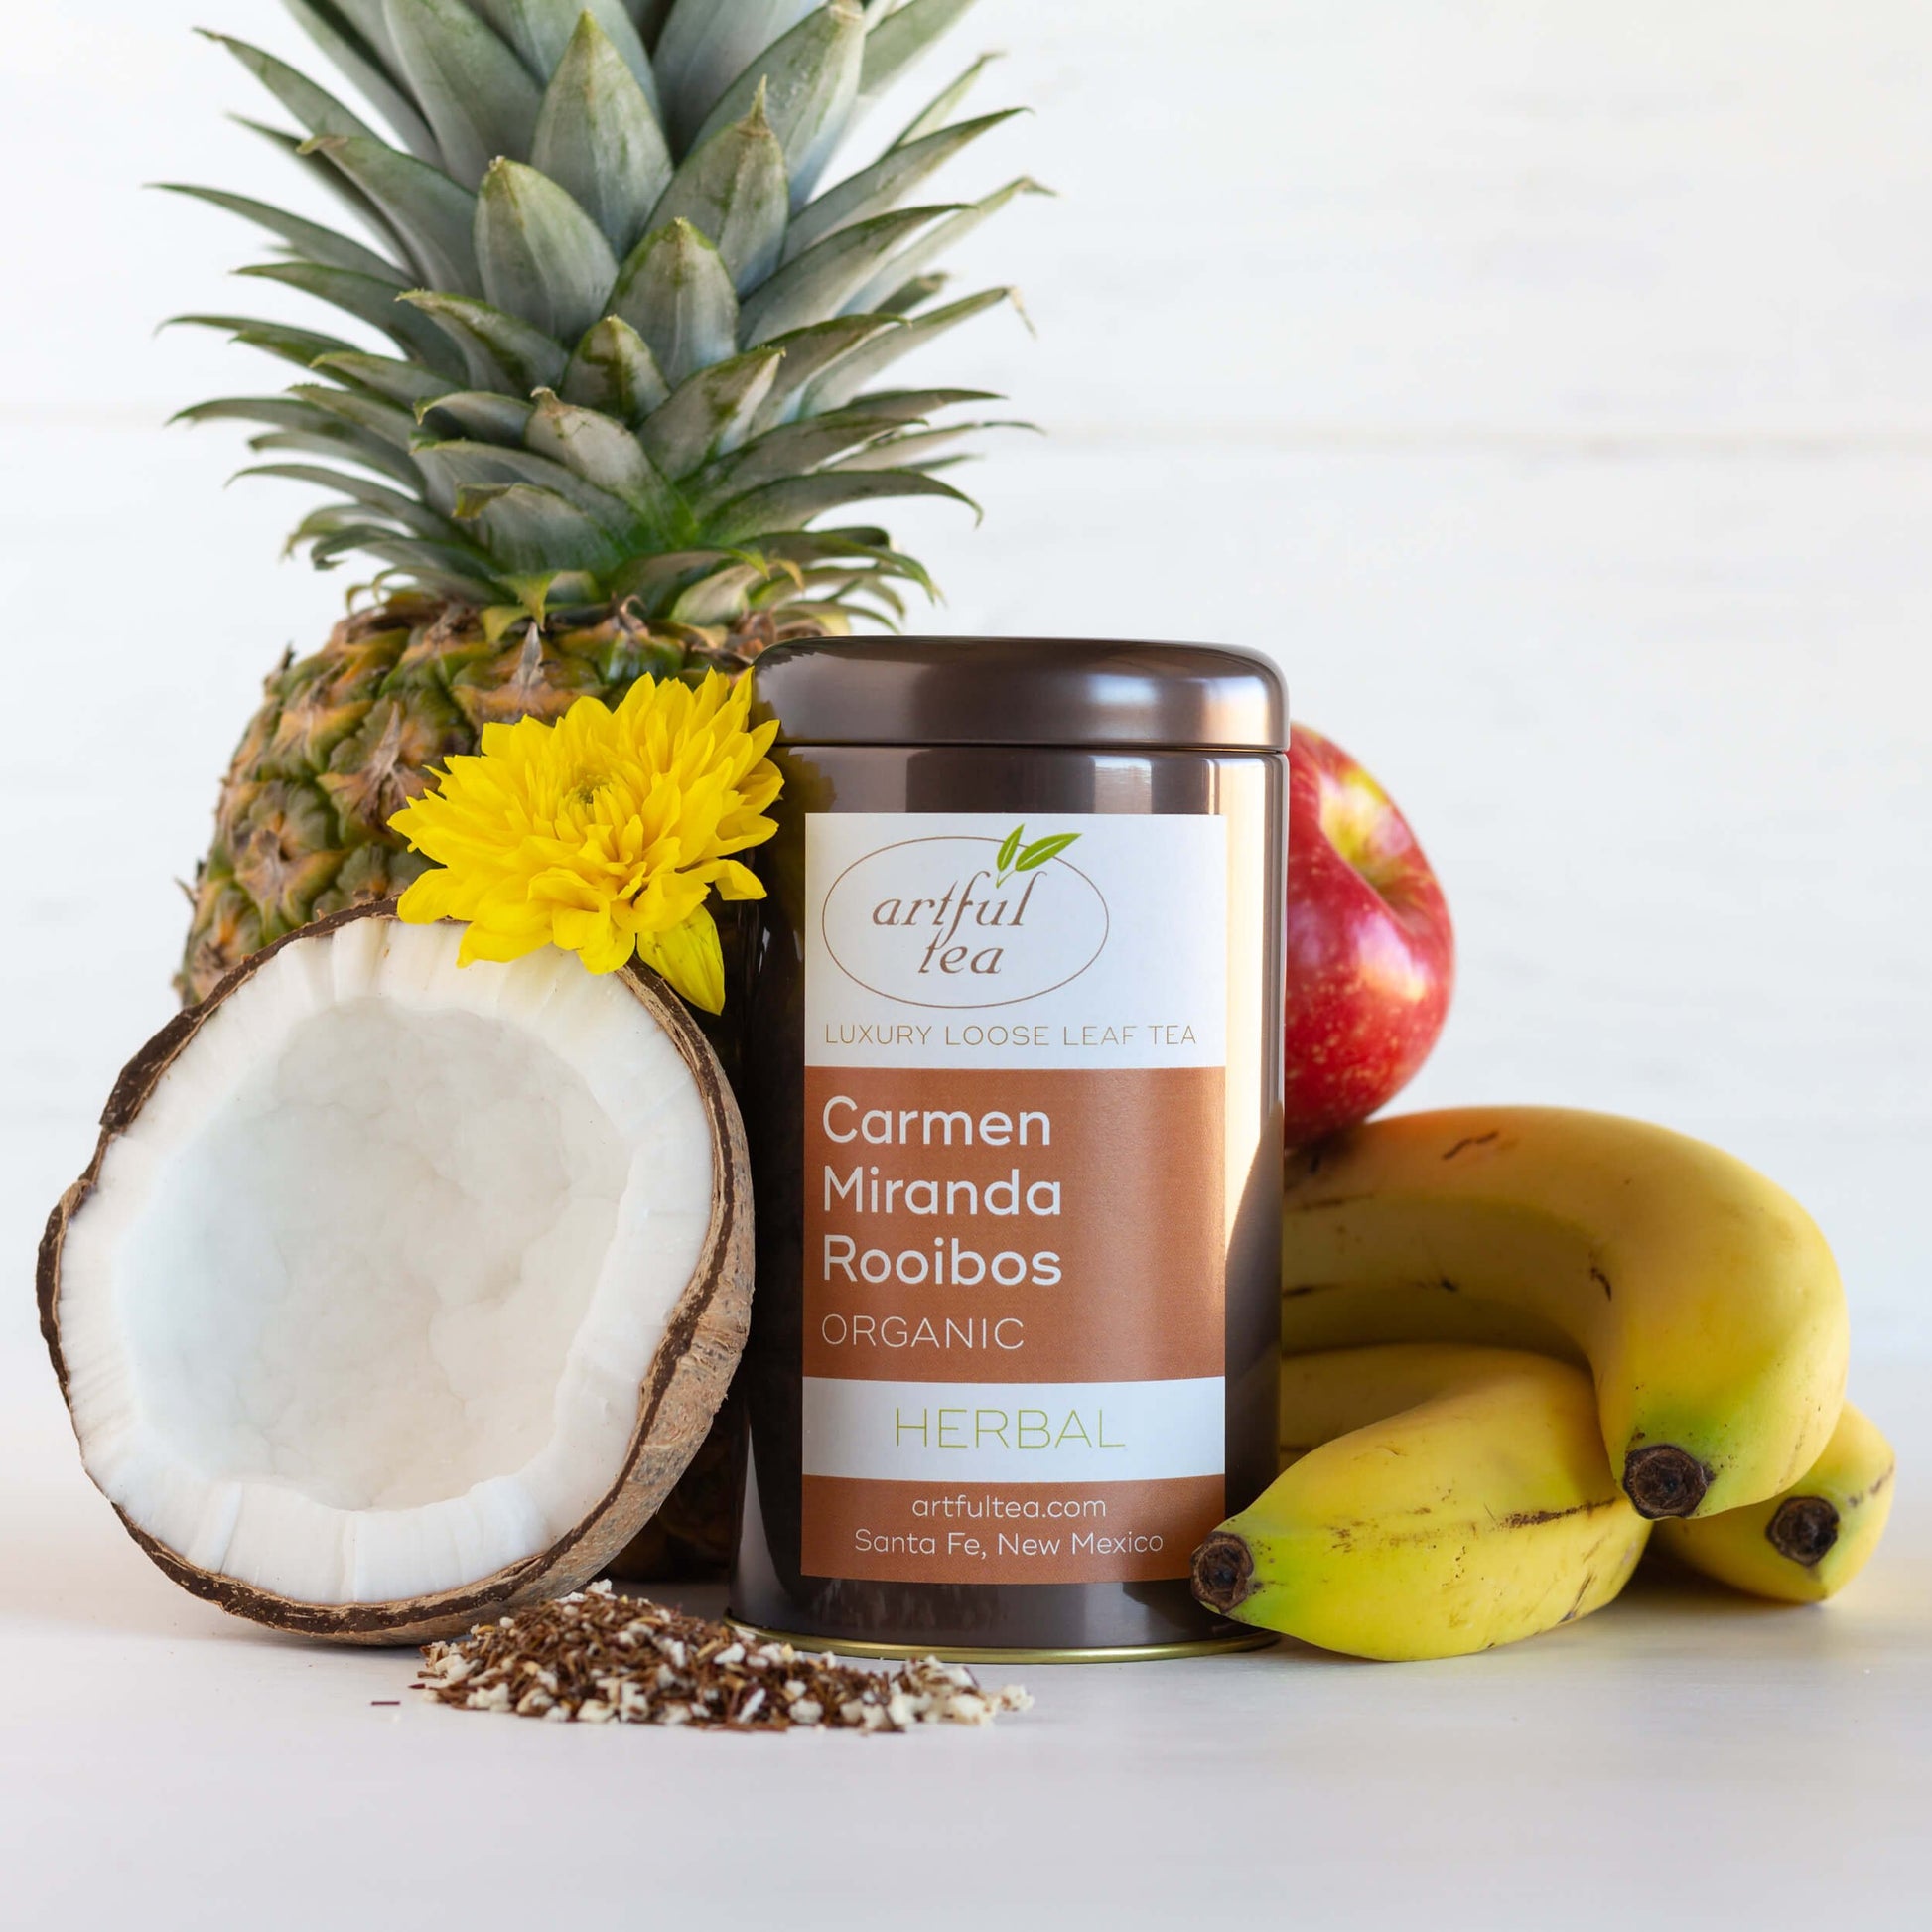 Carmen Miranda Rooibos Organic Herbal Tea shown packaged in a brown tin, surrounded by bananas, a coconut half, a pineapple, an apple, and a yellow flower